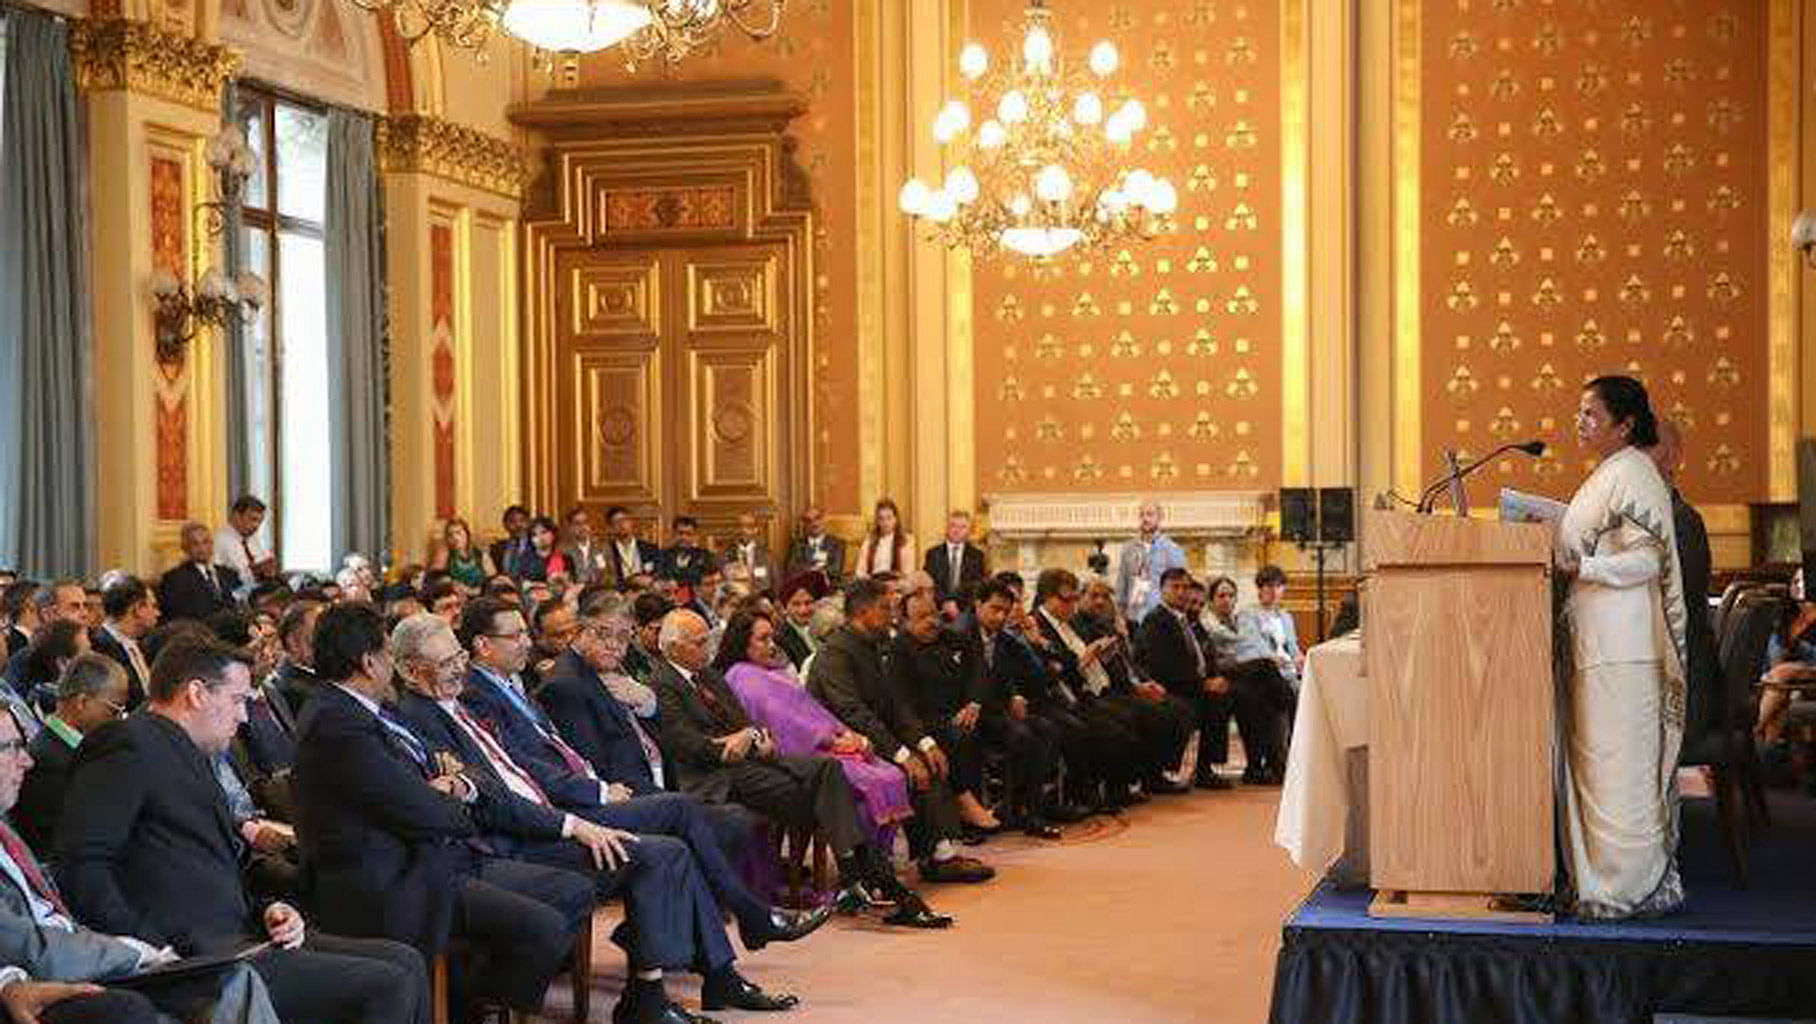 

West Bengal Chief Minister Mamata Banerjee addressing business delegates of UK at Foreign and Commonwealth Office, London. (Photo courtesy: <a href="https://www.facebook.com/MamataBanerjeeOfficial?fref=photo">www.facebook.com/MamataBanerjeeOfficial</a>)